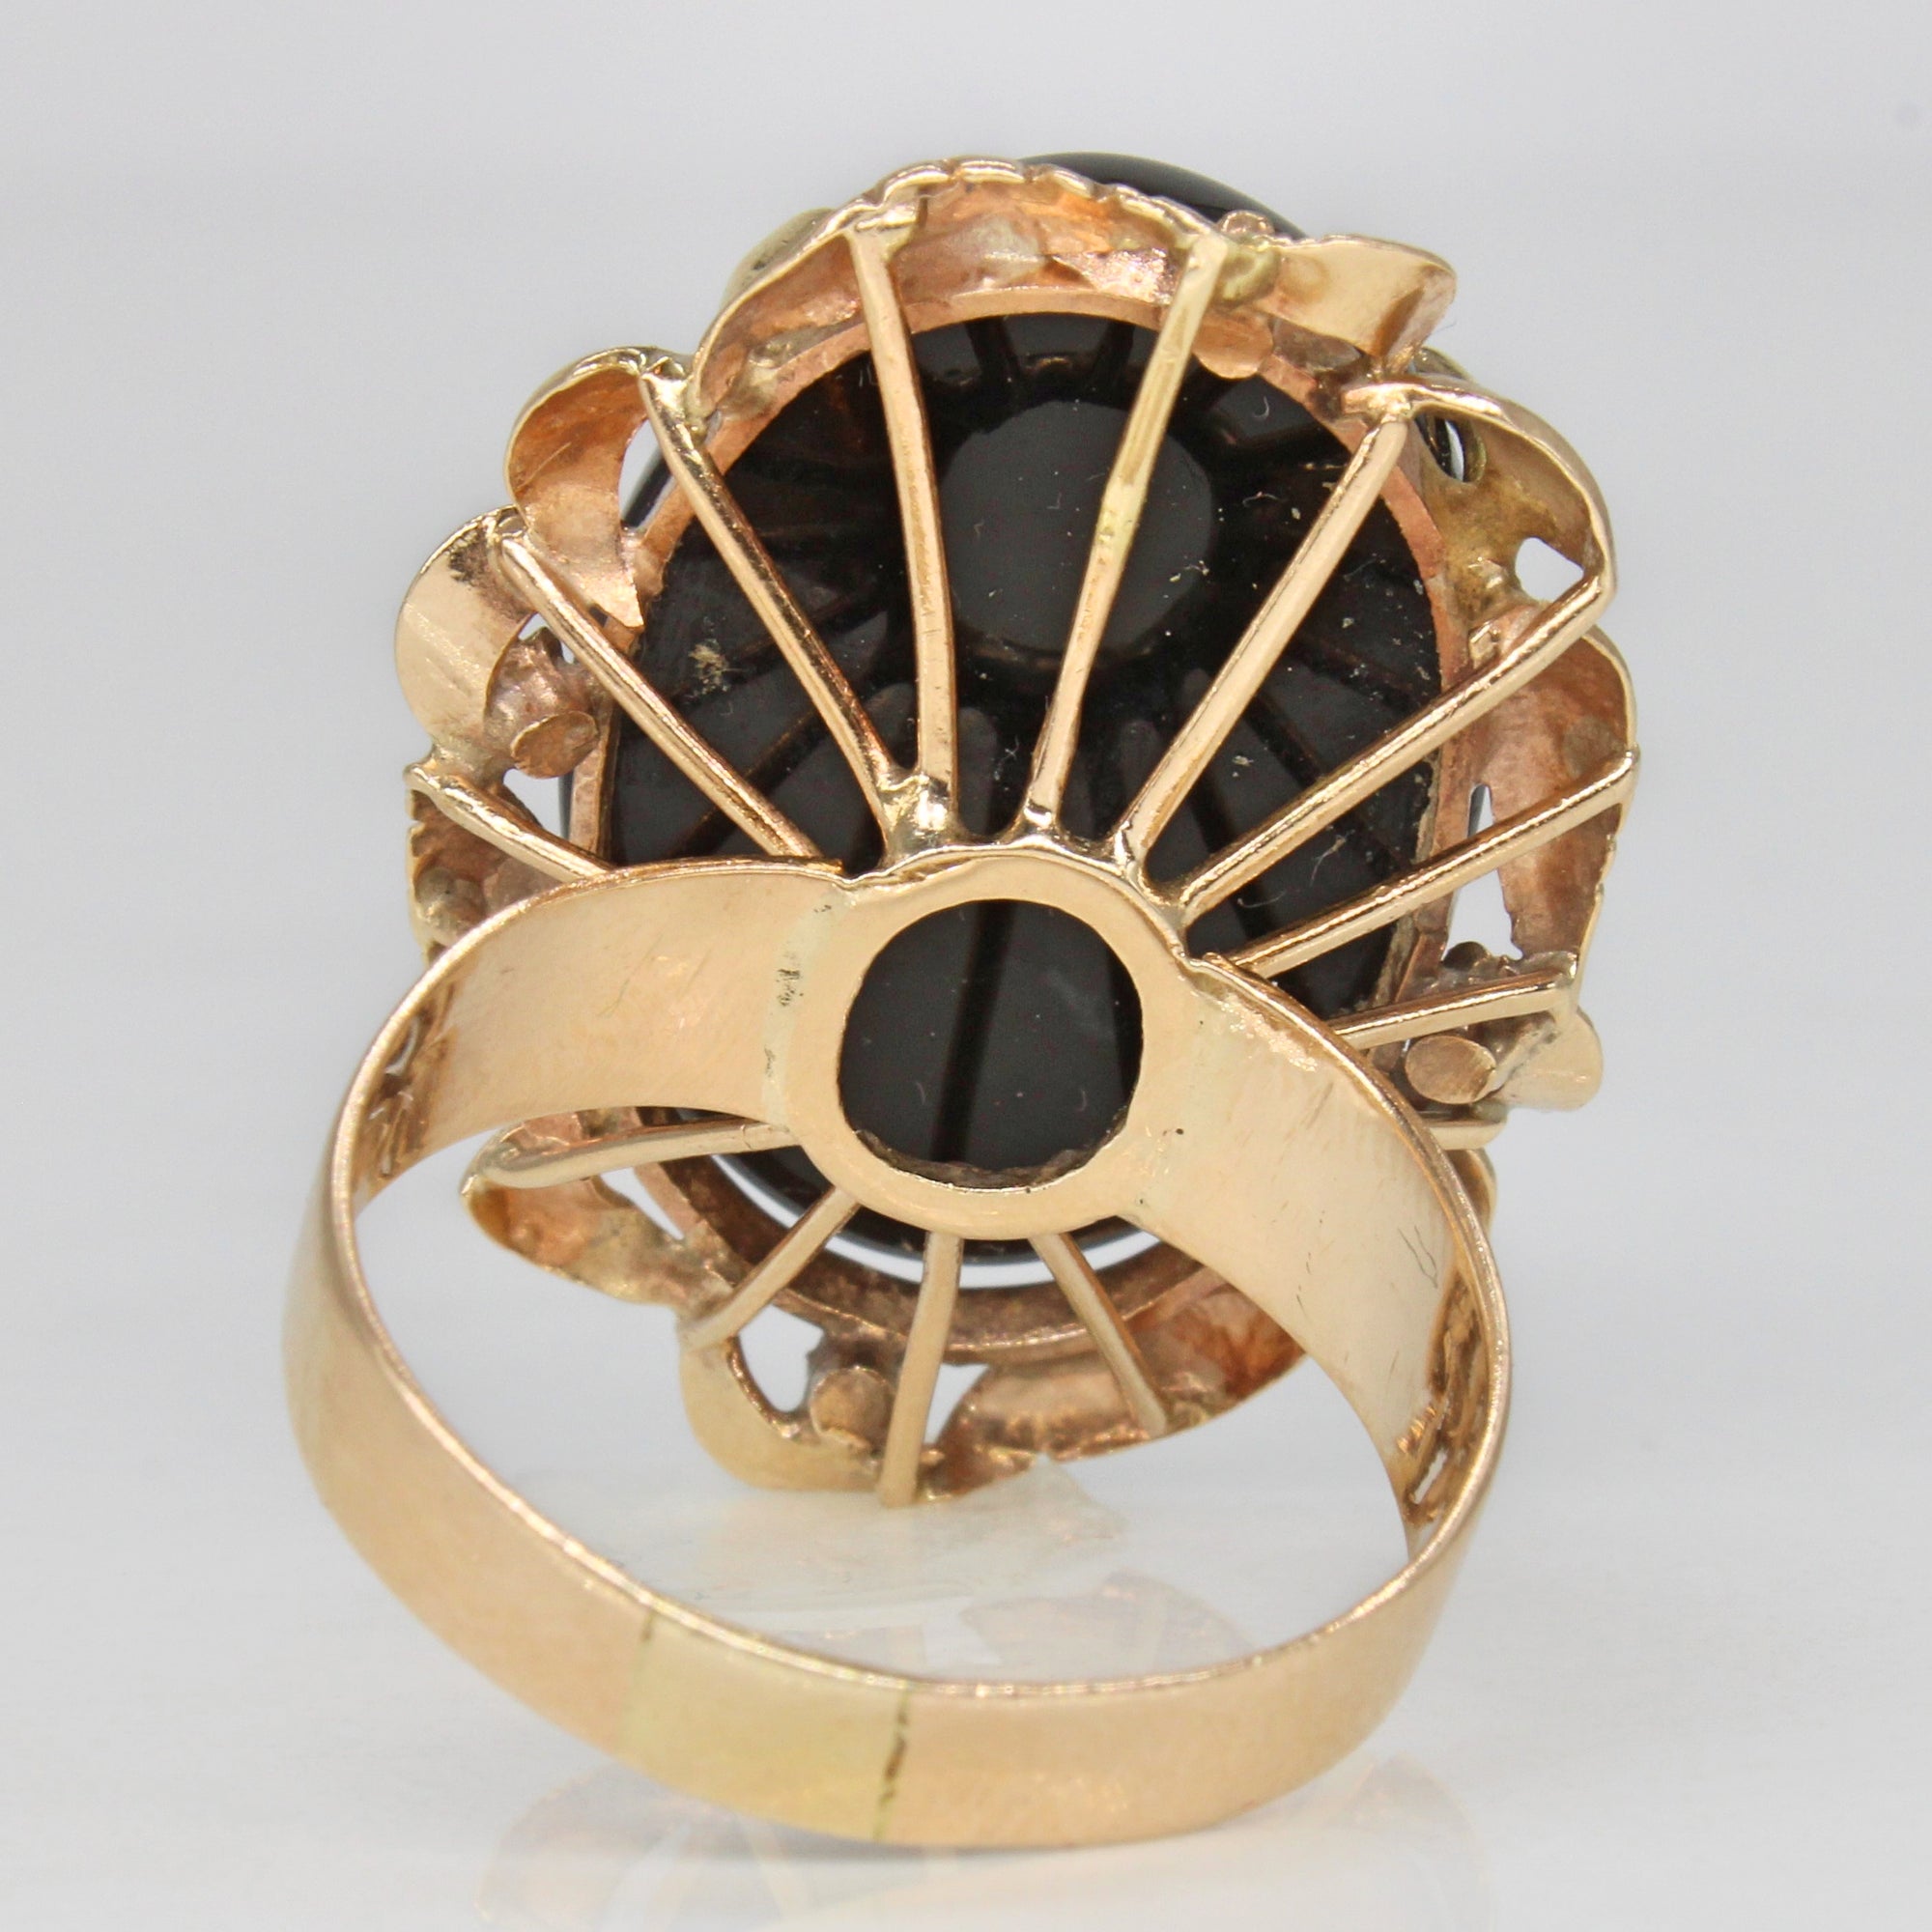 Golden Halo Onyx Cocktail Ring | 19.25ct | SZ 7.5 |